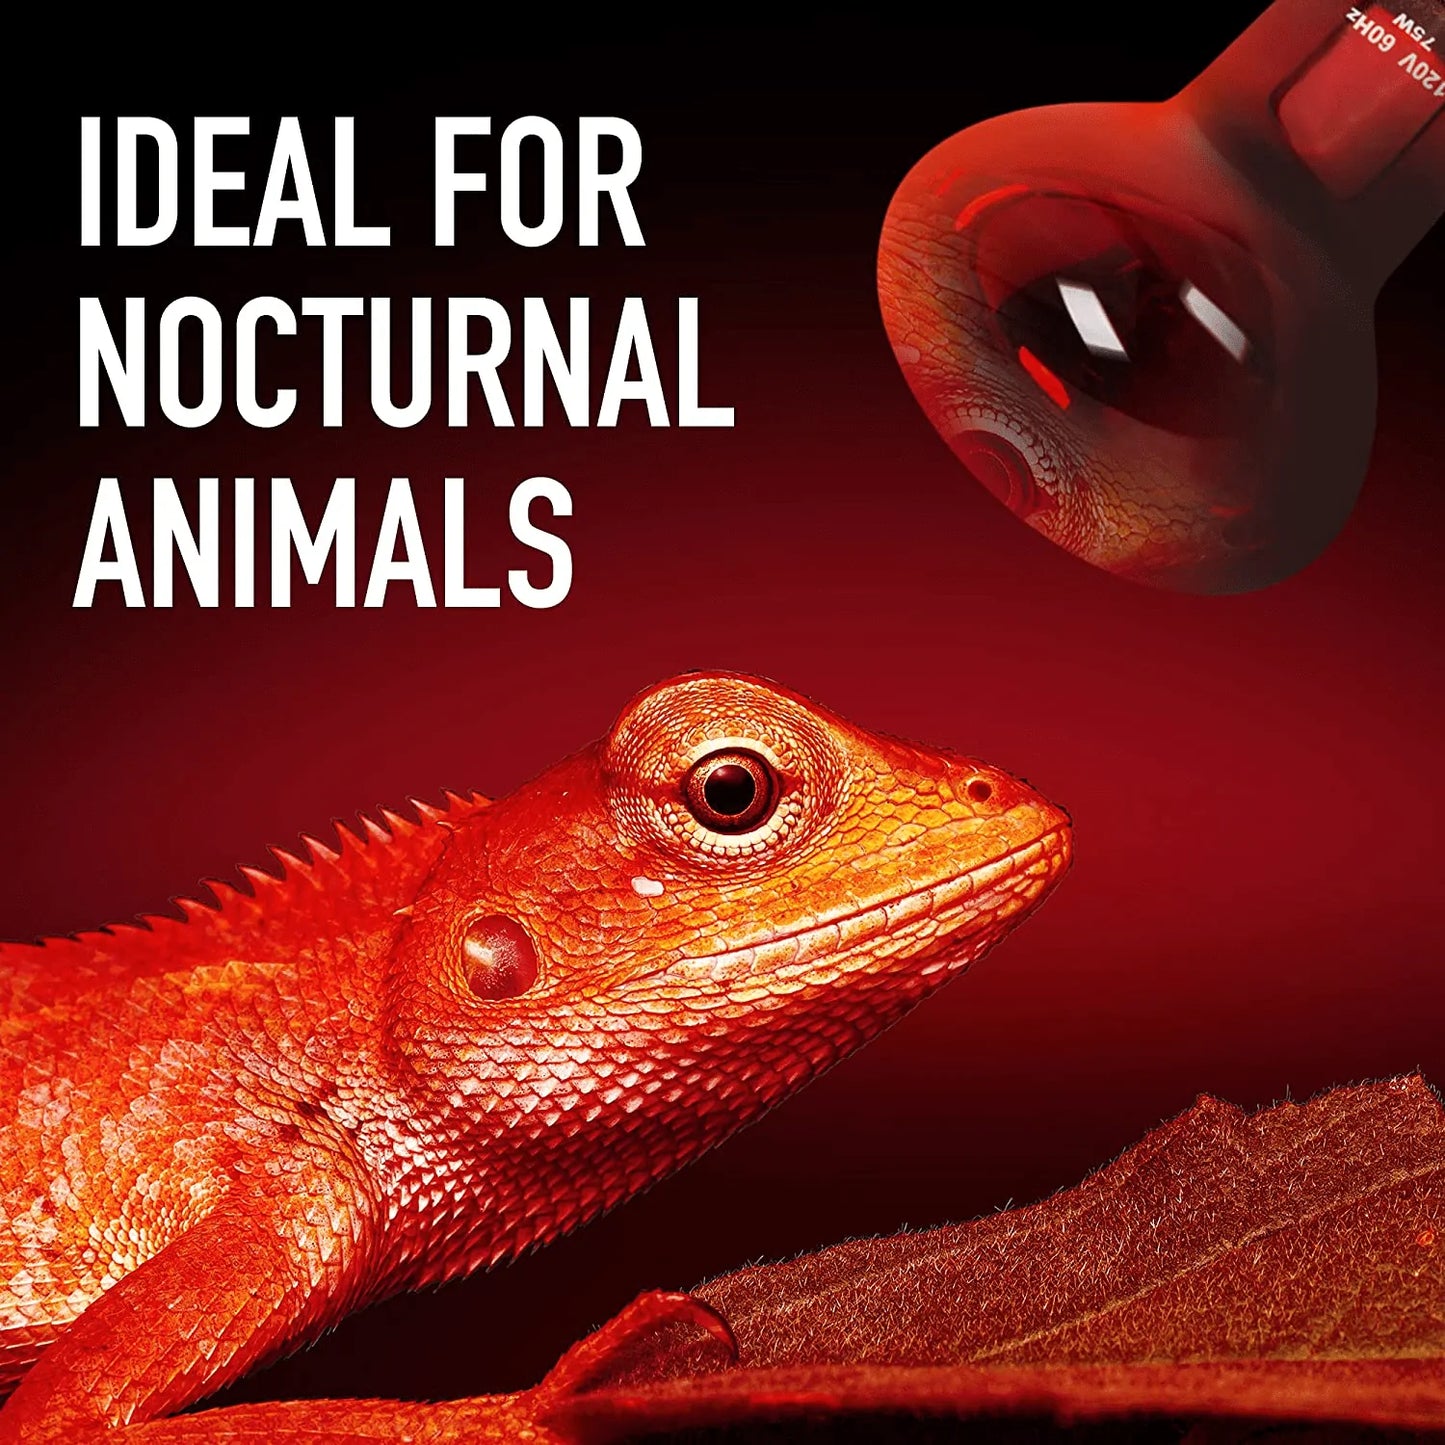 [2-Pack]‌ ‌75‌ ‌Watt‌ ‌Infrared‌ ‌Heat‌ ‌Lamp Bulb‌ ‌For‌ ‌Reptiles‌ ‌-‌ ‌‌ Keeps‌ ‌Your‌ ‌Animals‌ ‌Warm‌ ‌-‌ ‌Red‌ ‌Heat‌ ‌Lamp‌ ‌Bulb‌ ‌Compatible‌ ‌With‌ ‌A‌ ‌Variety‌ ‌Of‌ ‌Enclosures‌ Animals & Pet Supplies > Pet Supplies > Reptile & Amphibian Supplies > Reptile & Amphibian Habitat Heating & Lighting Impresa   